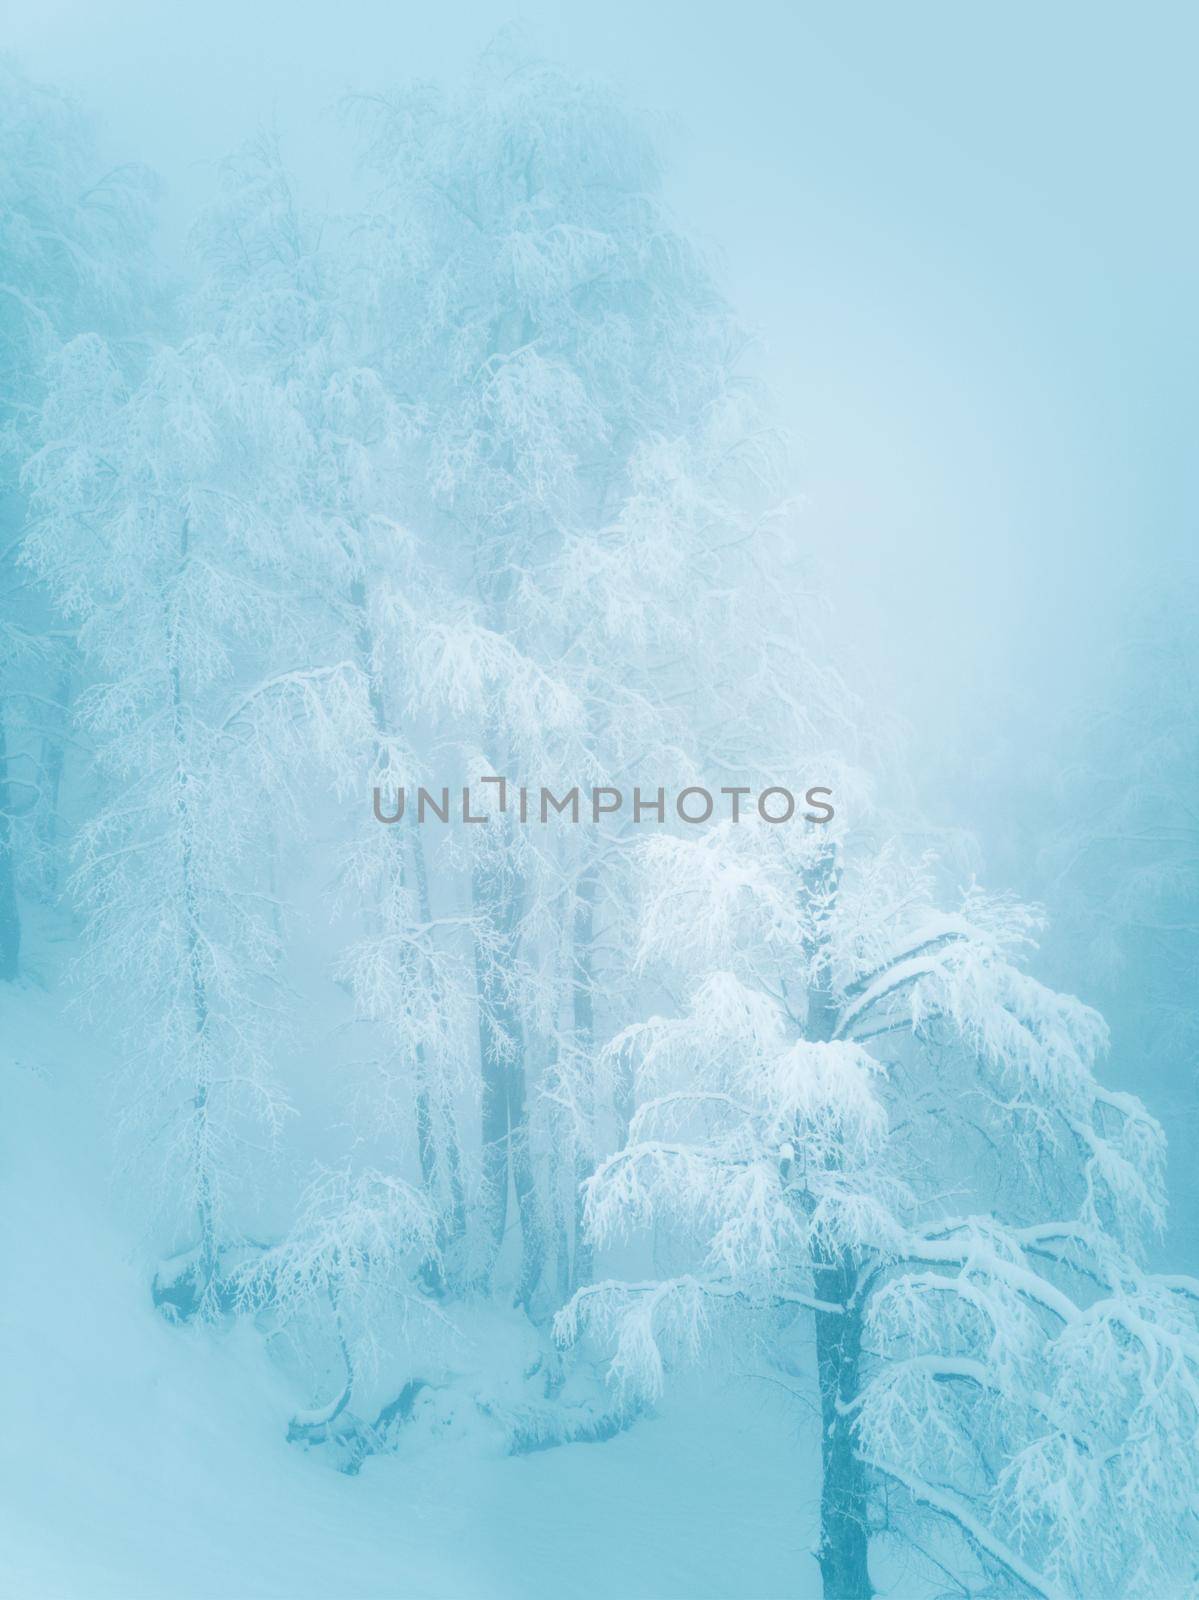 Beautiful winter landscape with forest in Caucasus mountains, Sochi, Russia, trees covered with snow frost, foggy morning